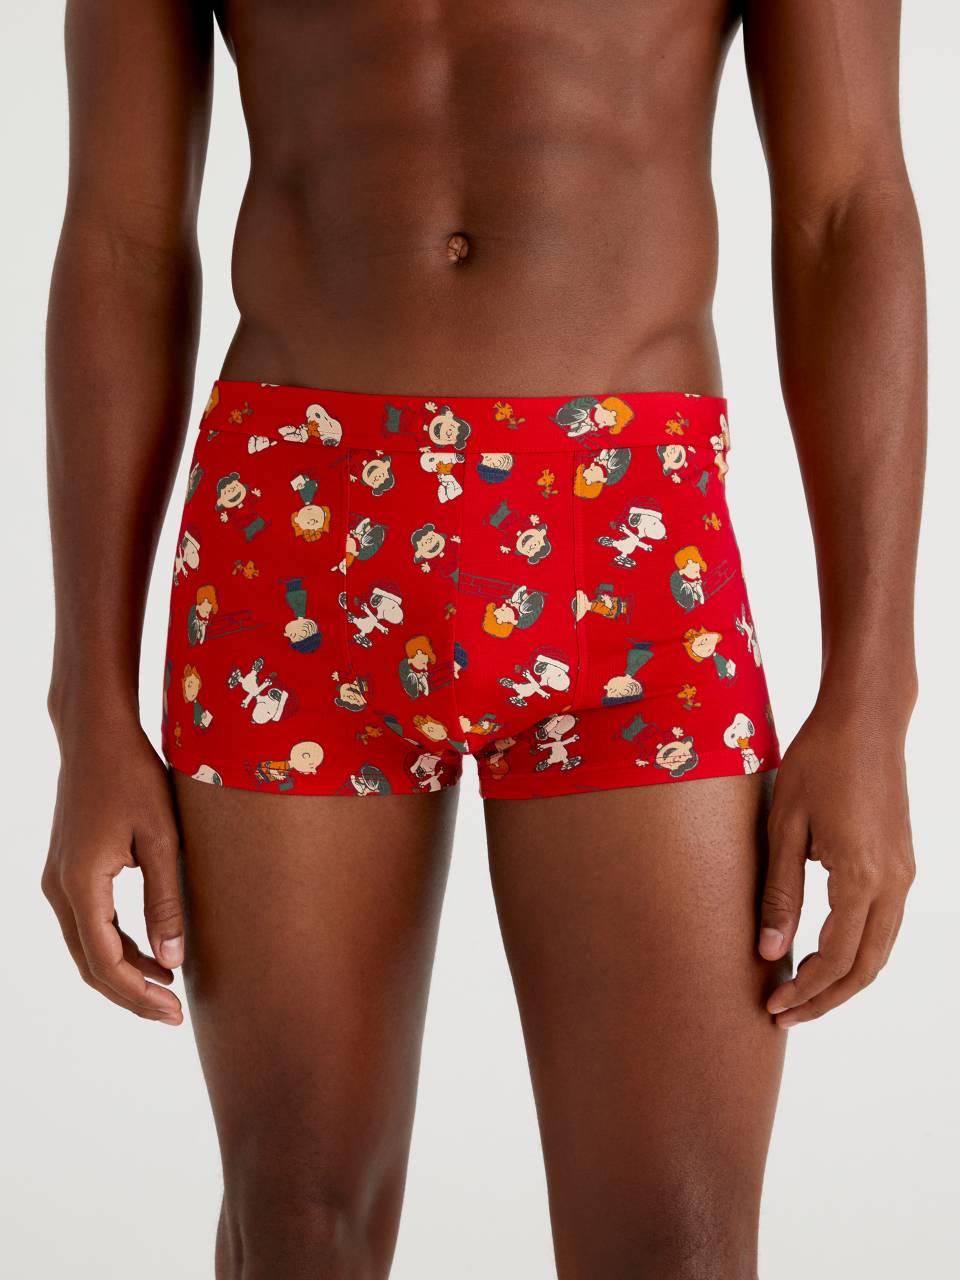 Men's Underwear: Red for the Holidays (PHOTOS)